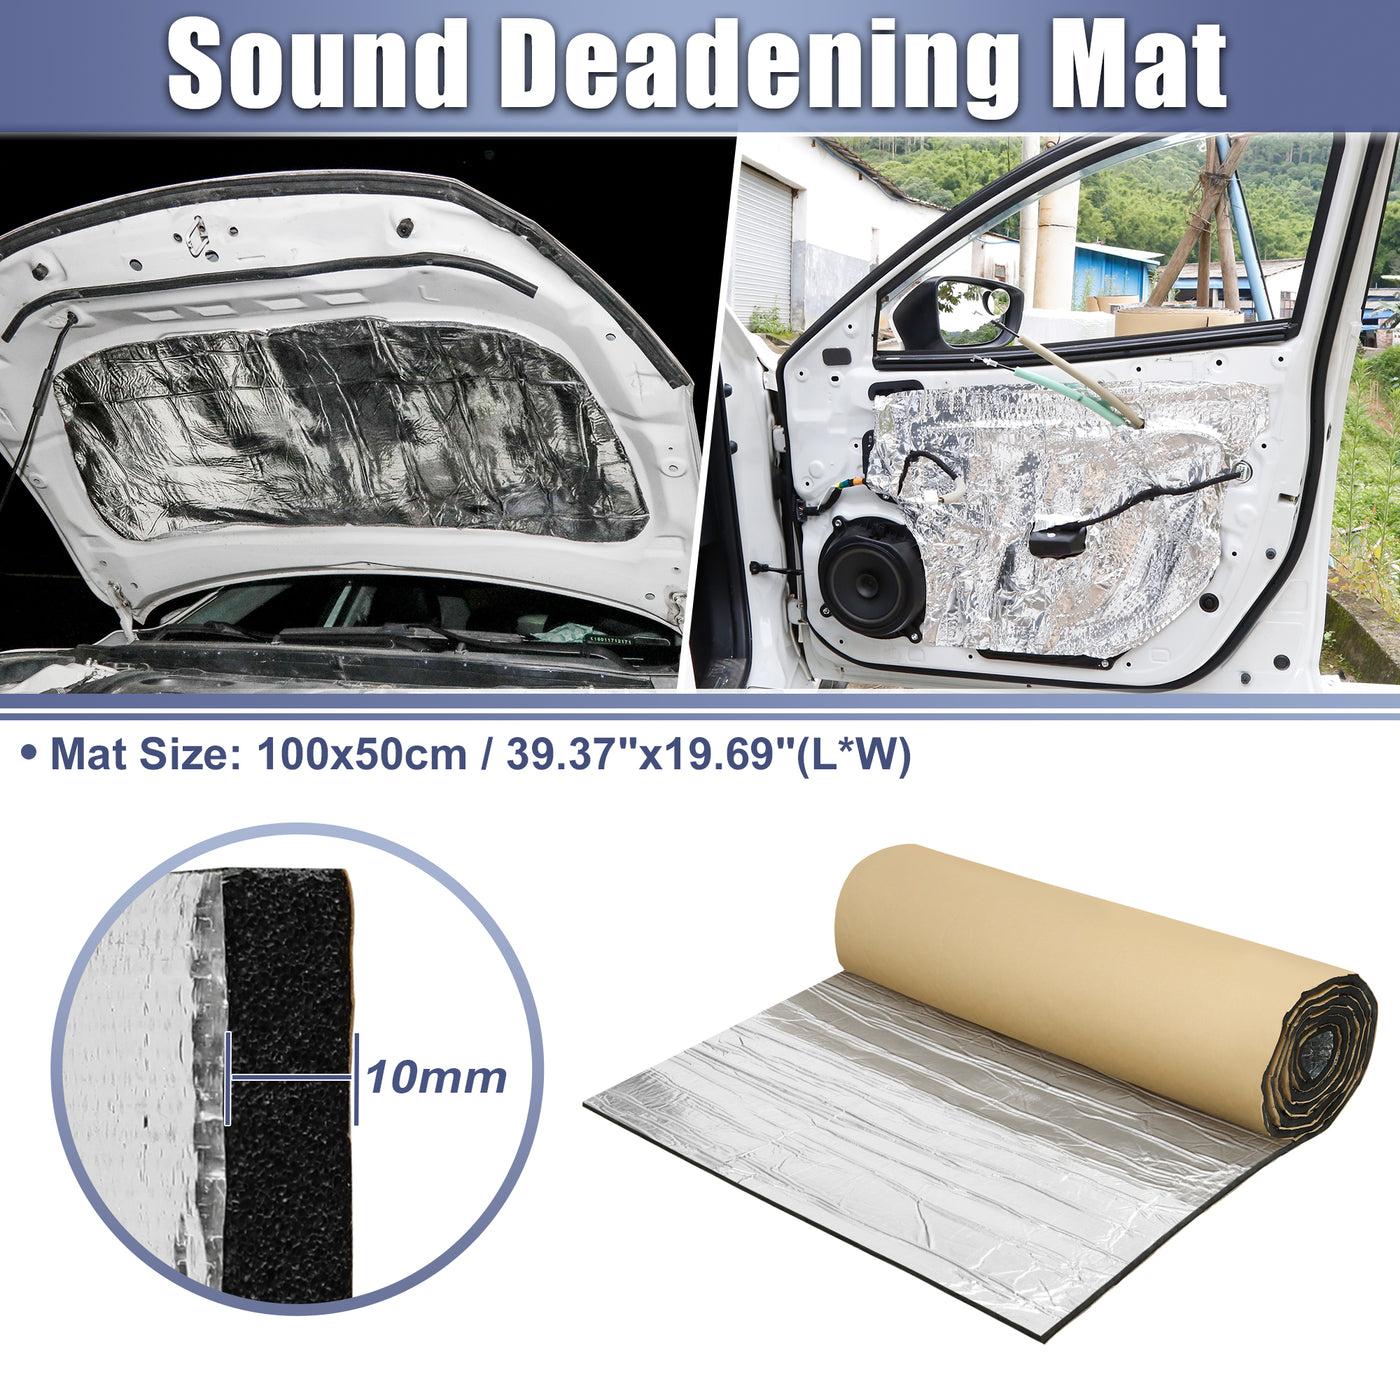 X AUTOHAUX 394mil 10mm 5.38sqft Car Sound Deadening Mat Glassfiber Closed Cell Foam Heat Shield Material Damping Self Adhesive Universal for Hood Fender and Boat Engine Cover 39.37"x19.69"